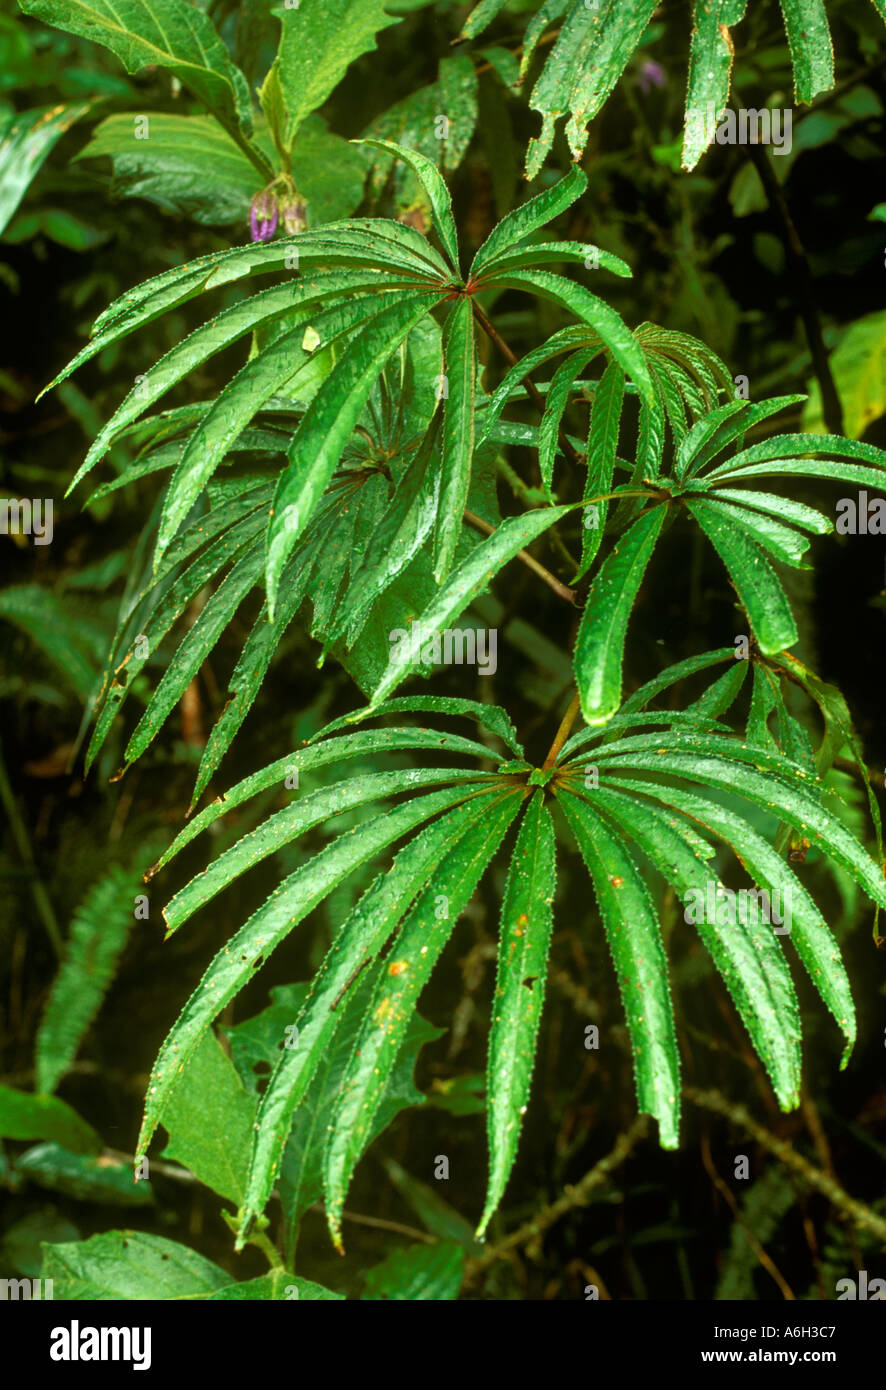 Begonia luxurians (Begoniaceae), a species with compound leaves in the Atlantic Forest (Mata Atlântica) in the Serra do Mar. Rio de Janeiro State, Brazil. The Atlantic Rainforest is a biodiversity hotspot. Stock Photo